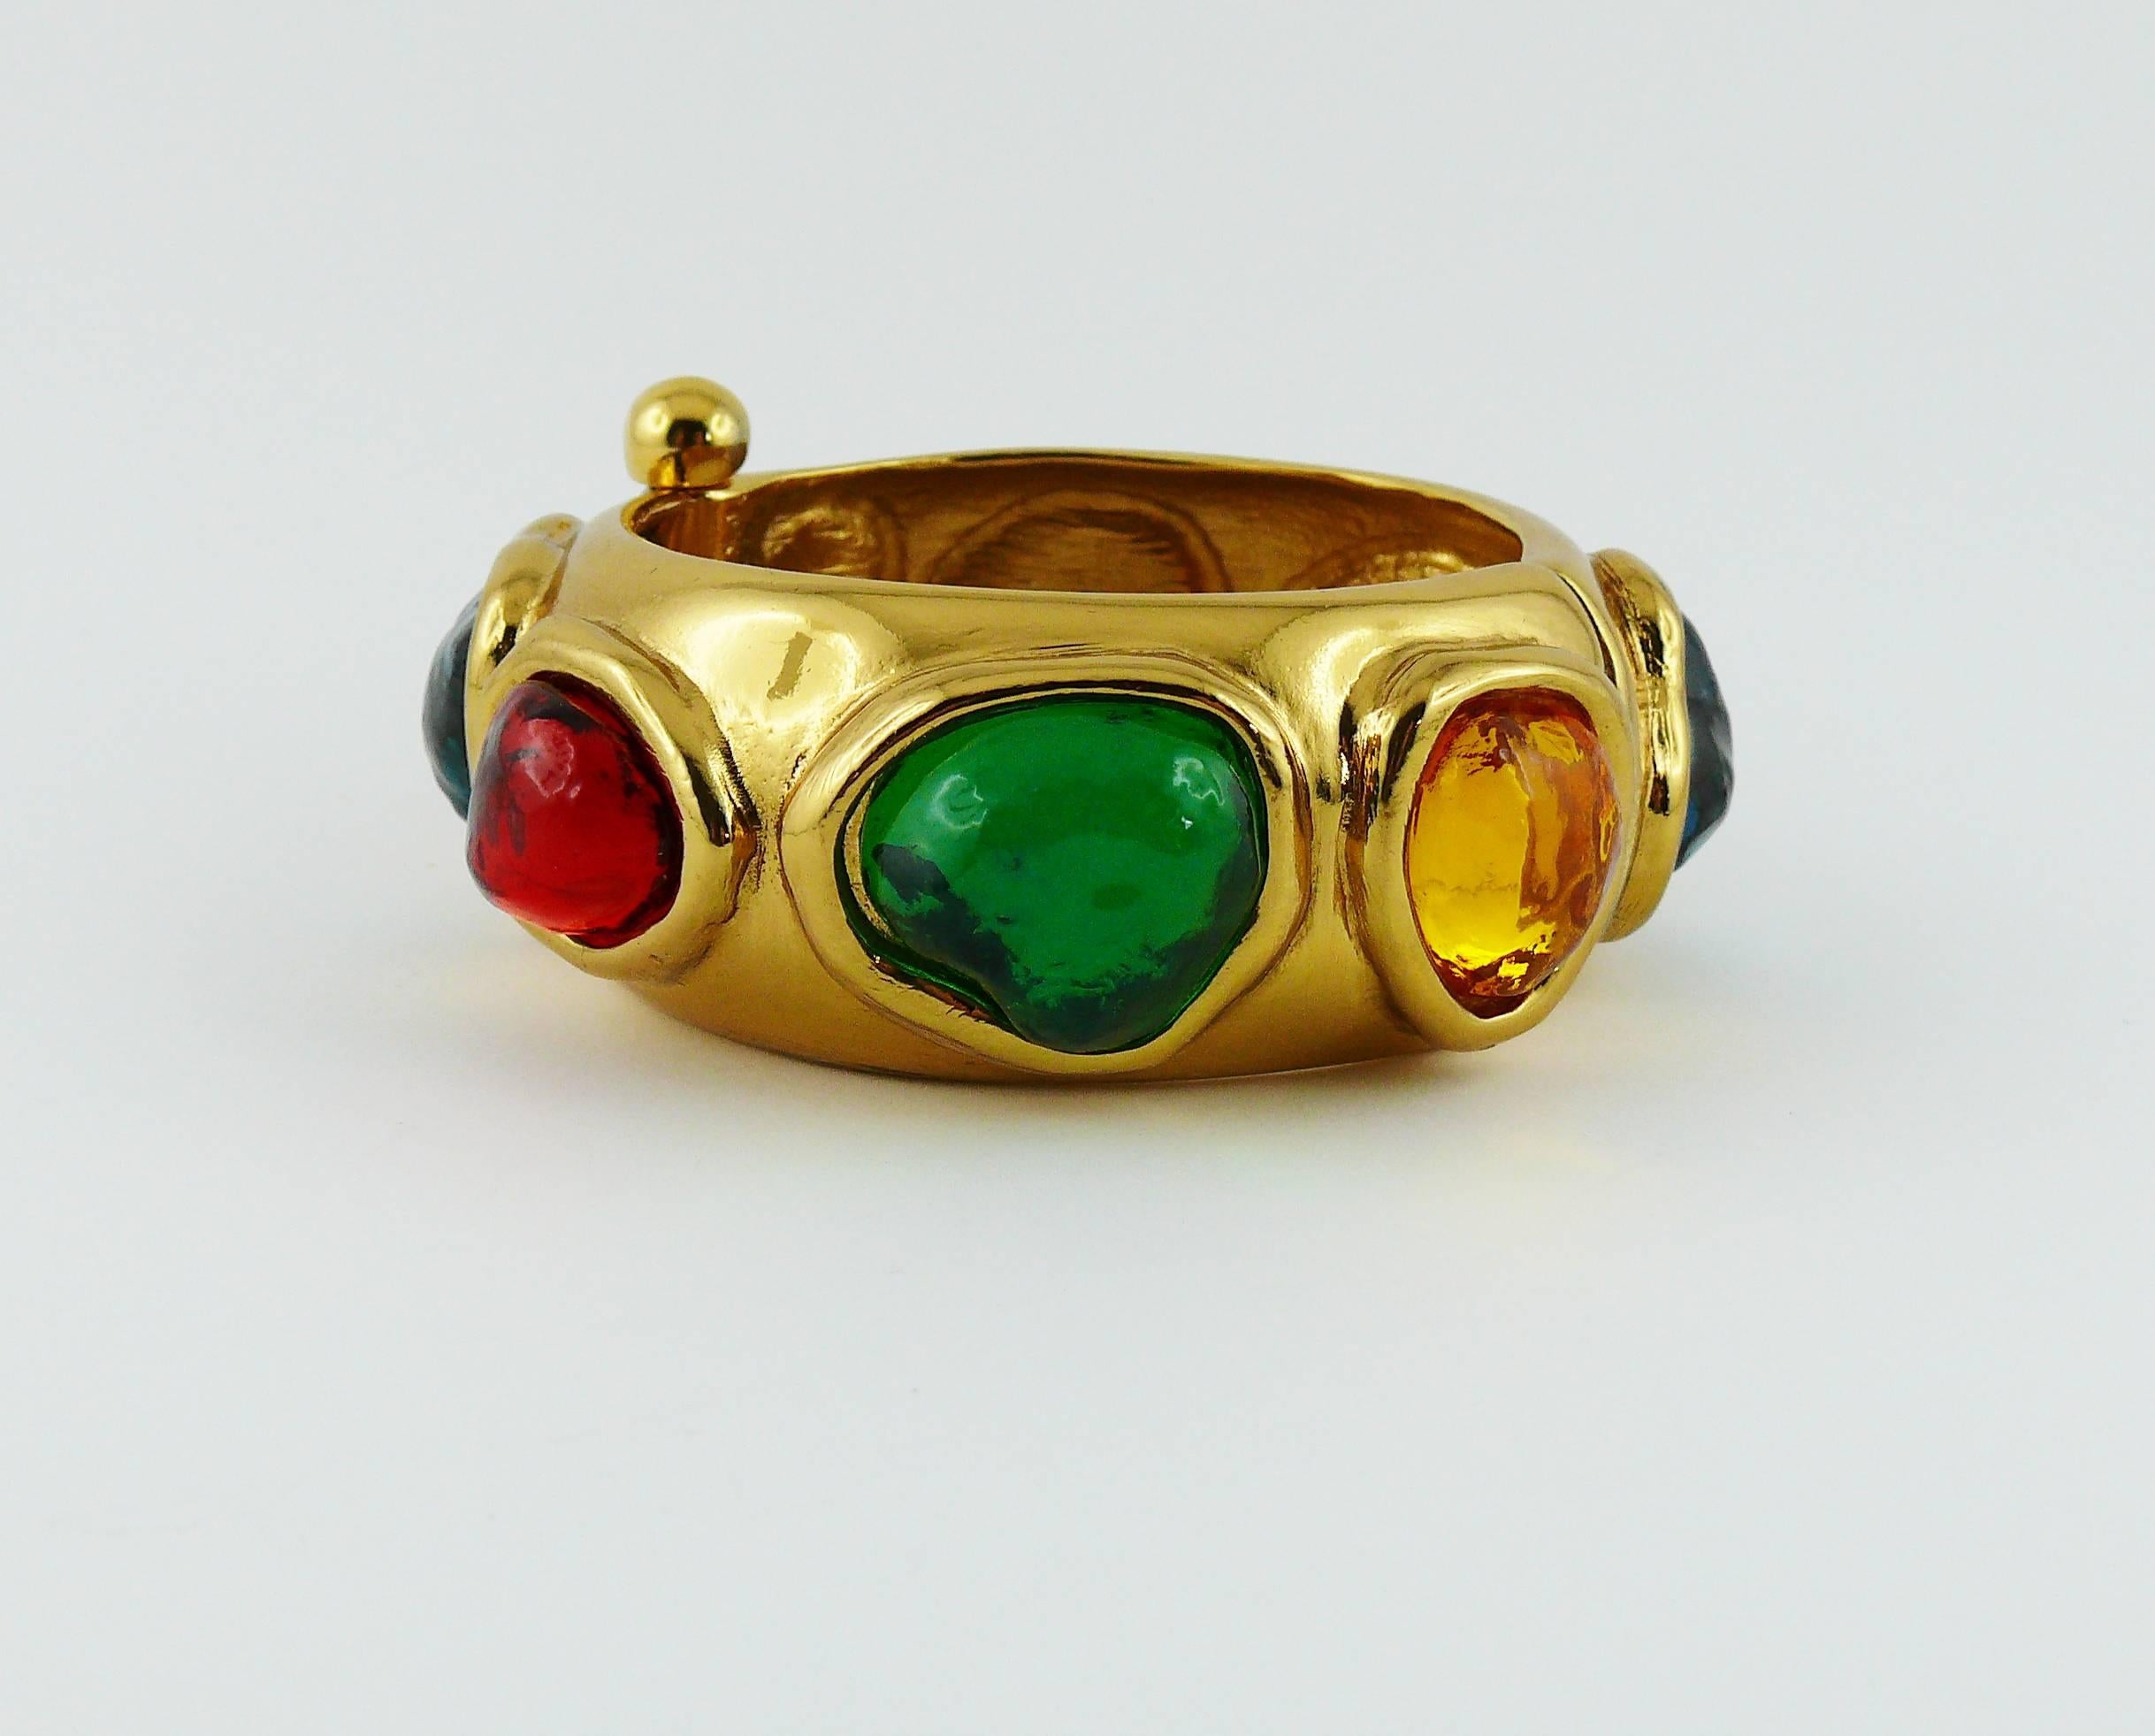 YVES SAINT LAURENT vintage cuff bracelet featuring large multicolored faux gemstone resin cabochons in a gold toned setting.

Embossed YSL Made in France.
Numbered E2.

Indicative measurements : inside circumference approx. 17.9 cm (7.05